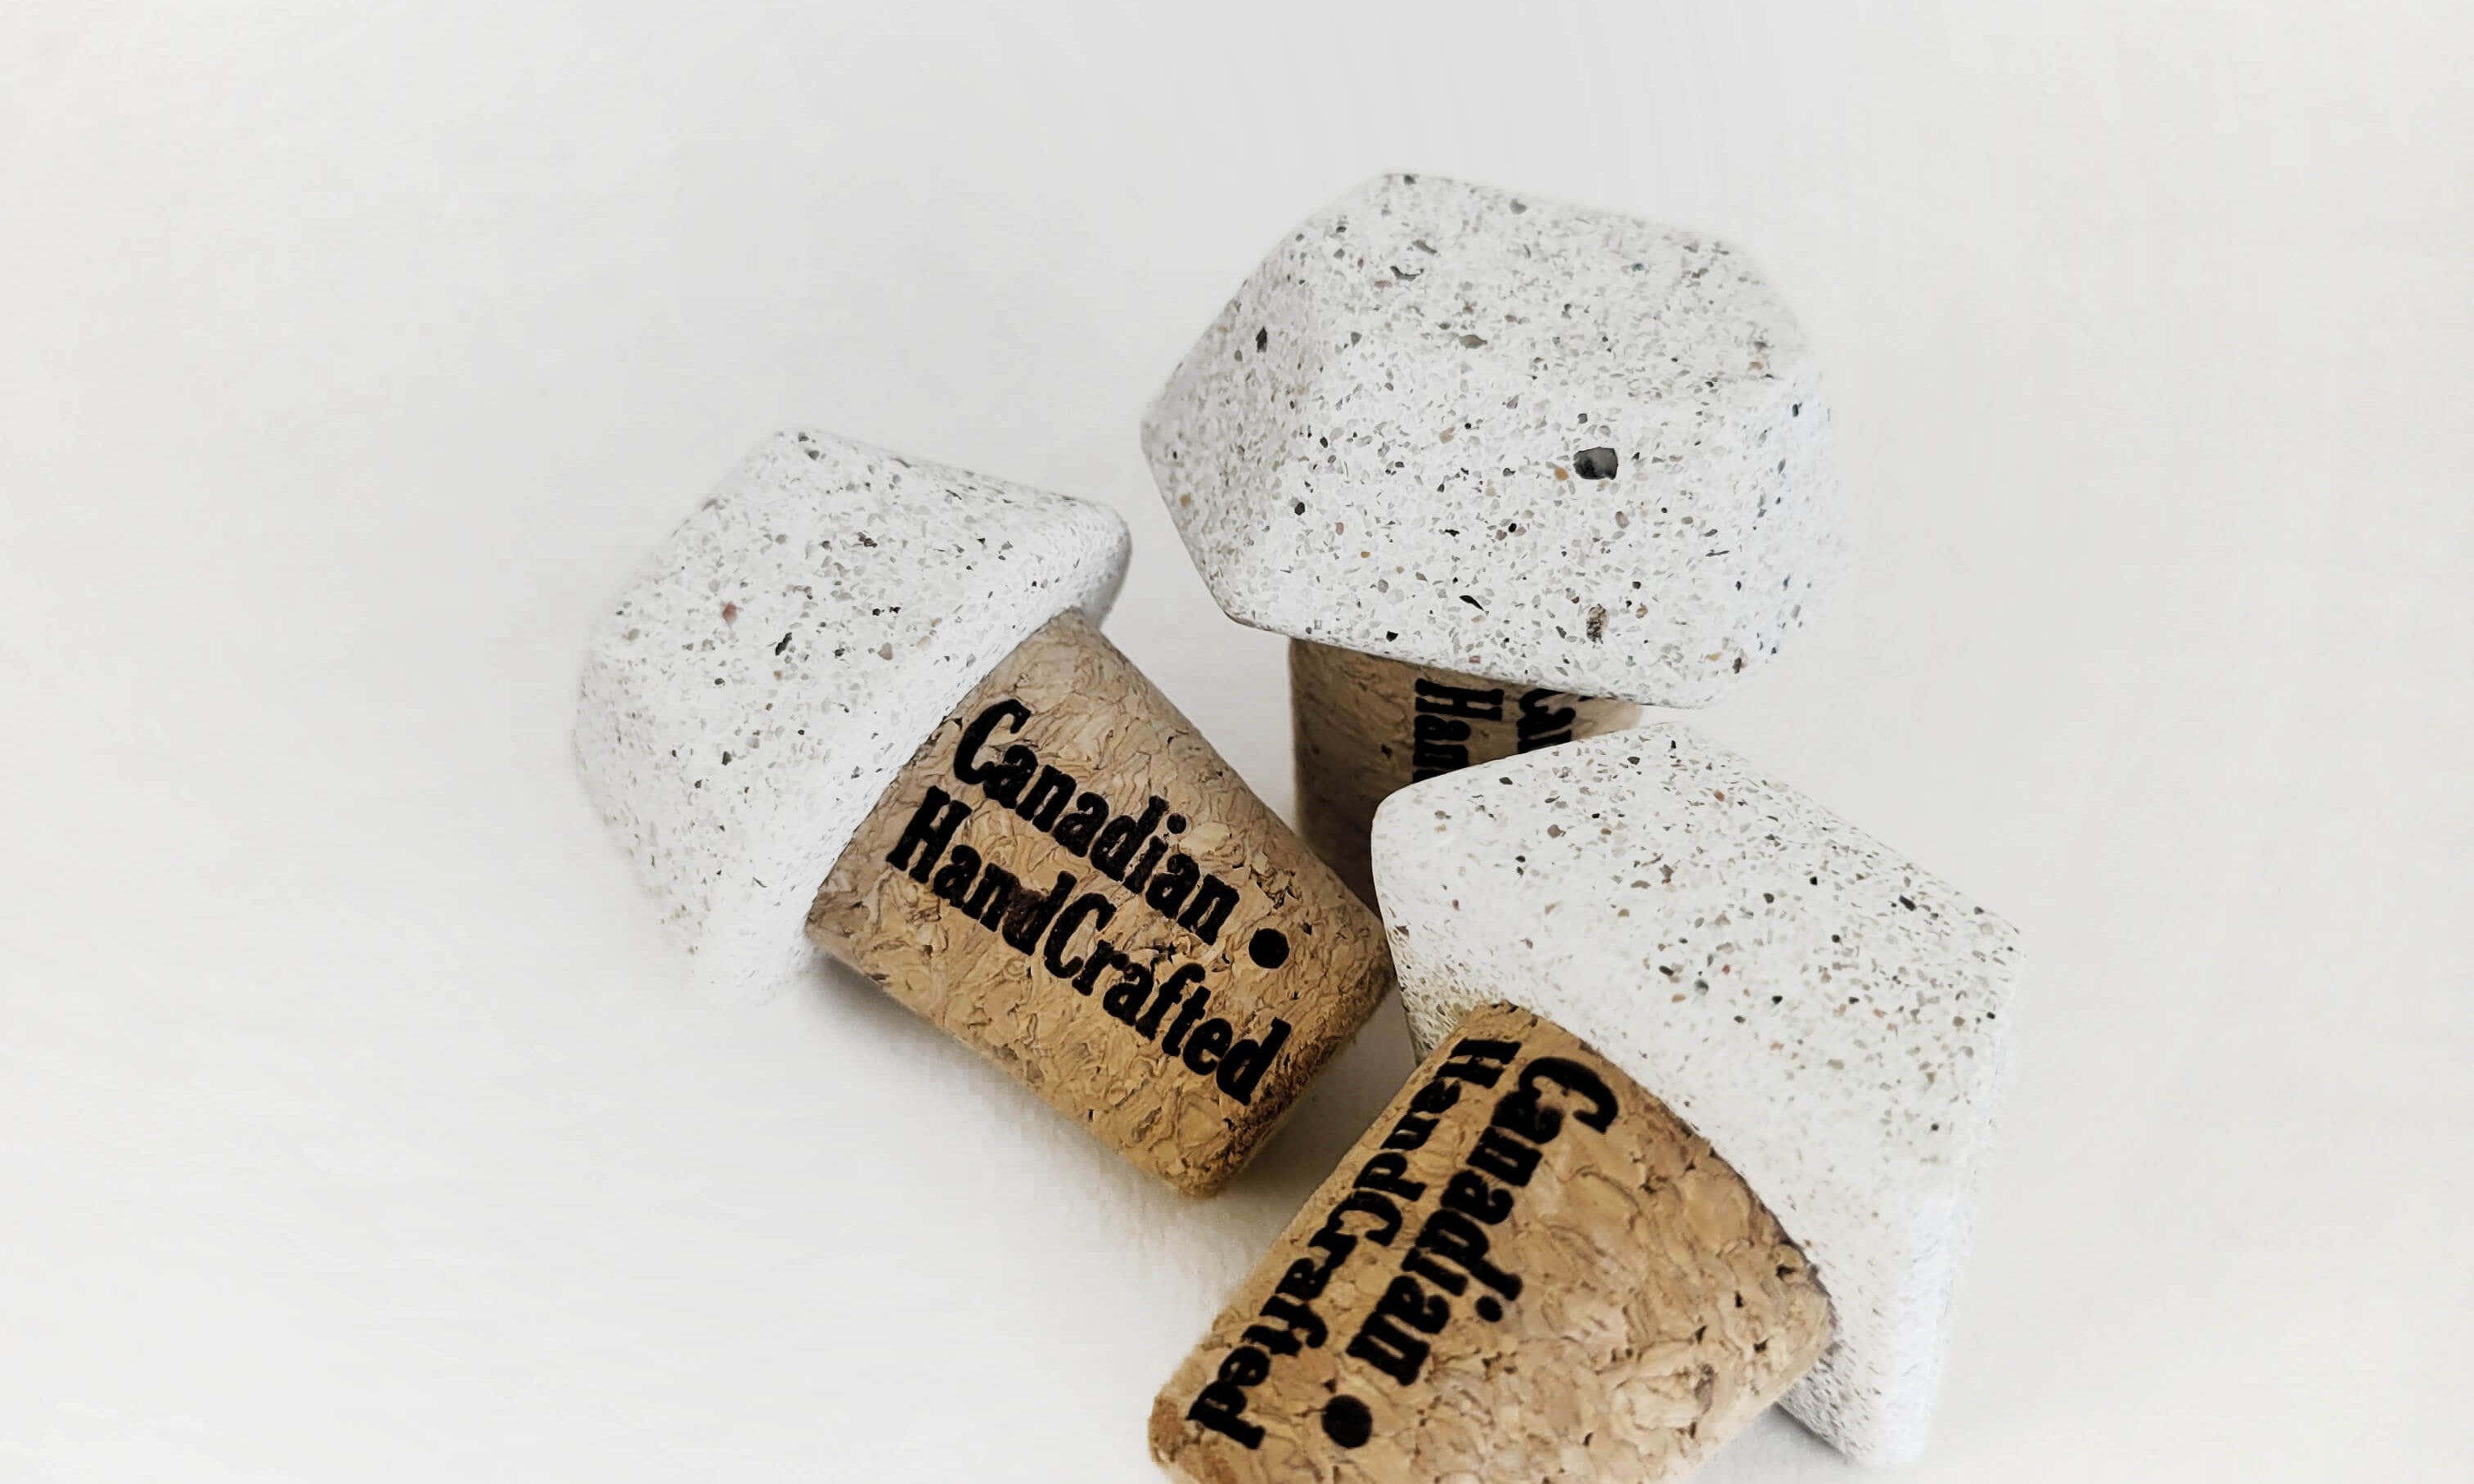 Custom Engraved Stone Wine Stopper Corks: Personalized Gifts for Wine Enthusiasts